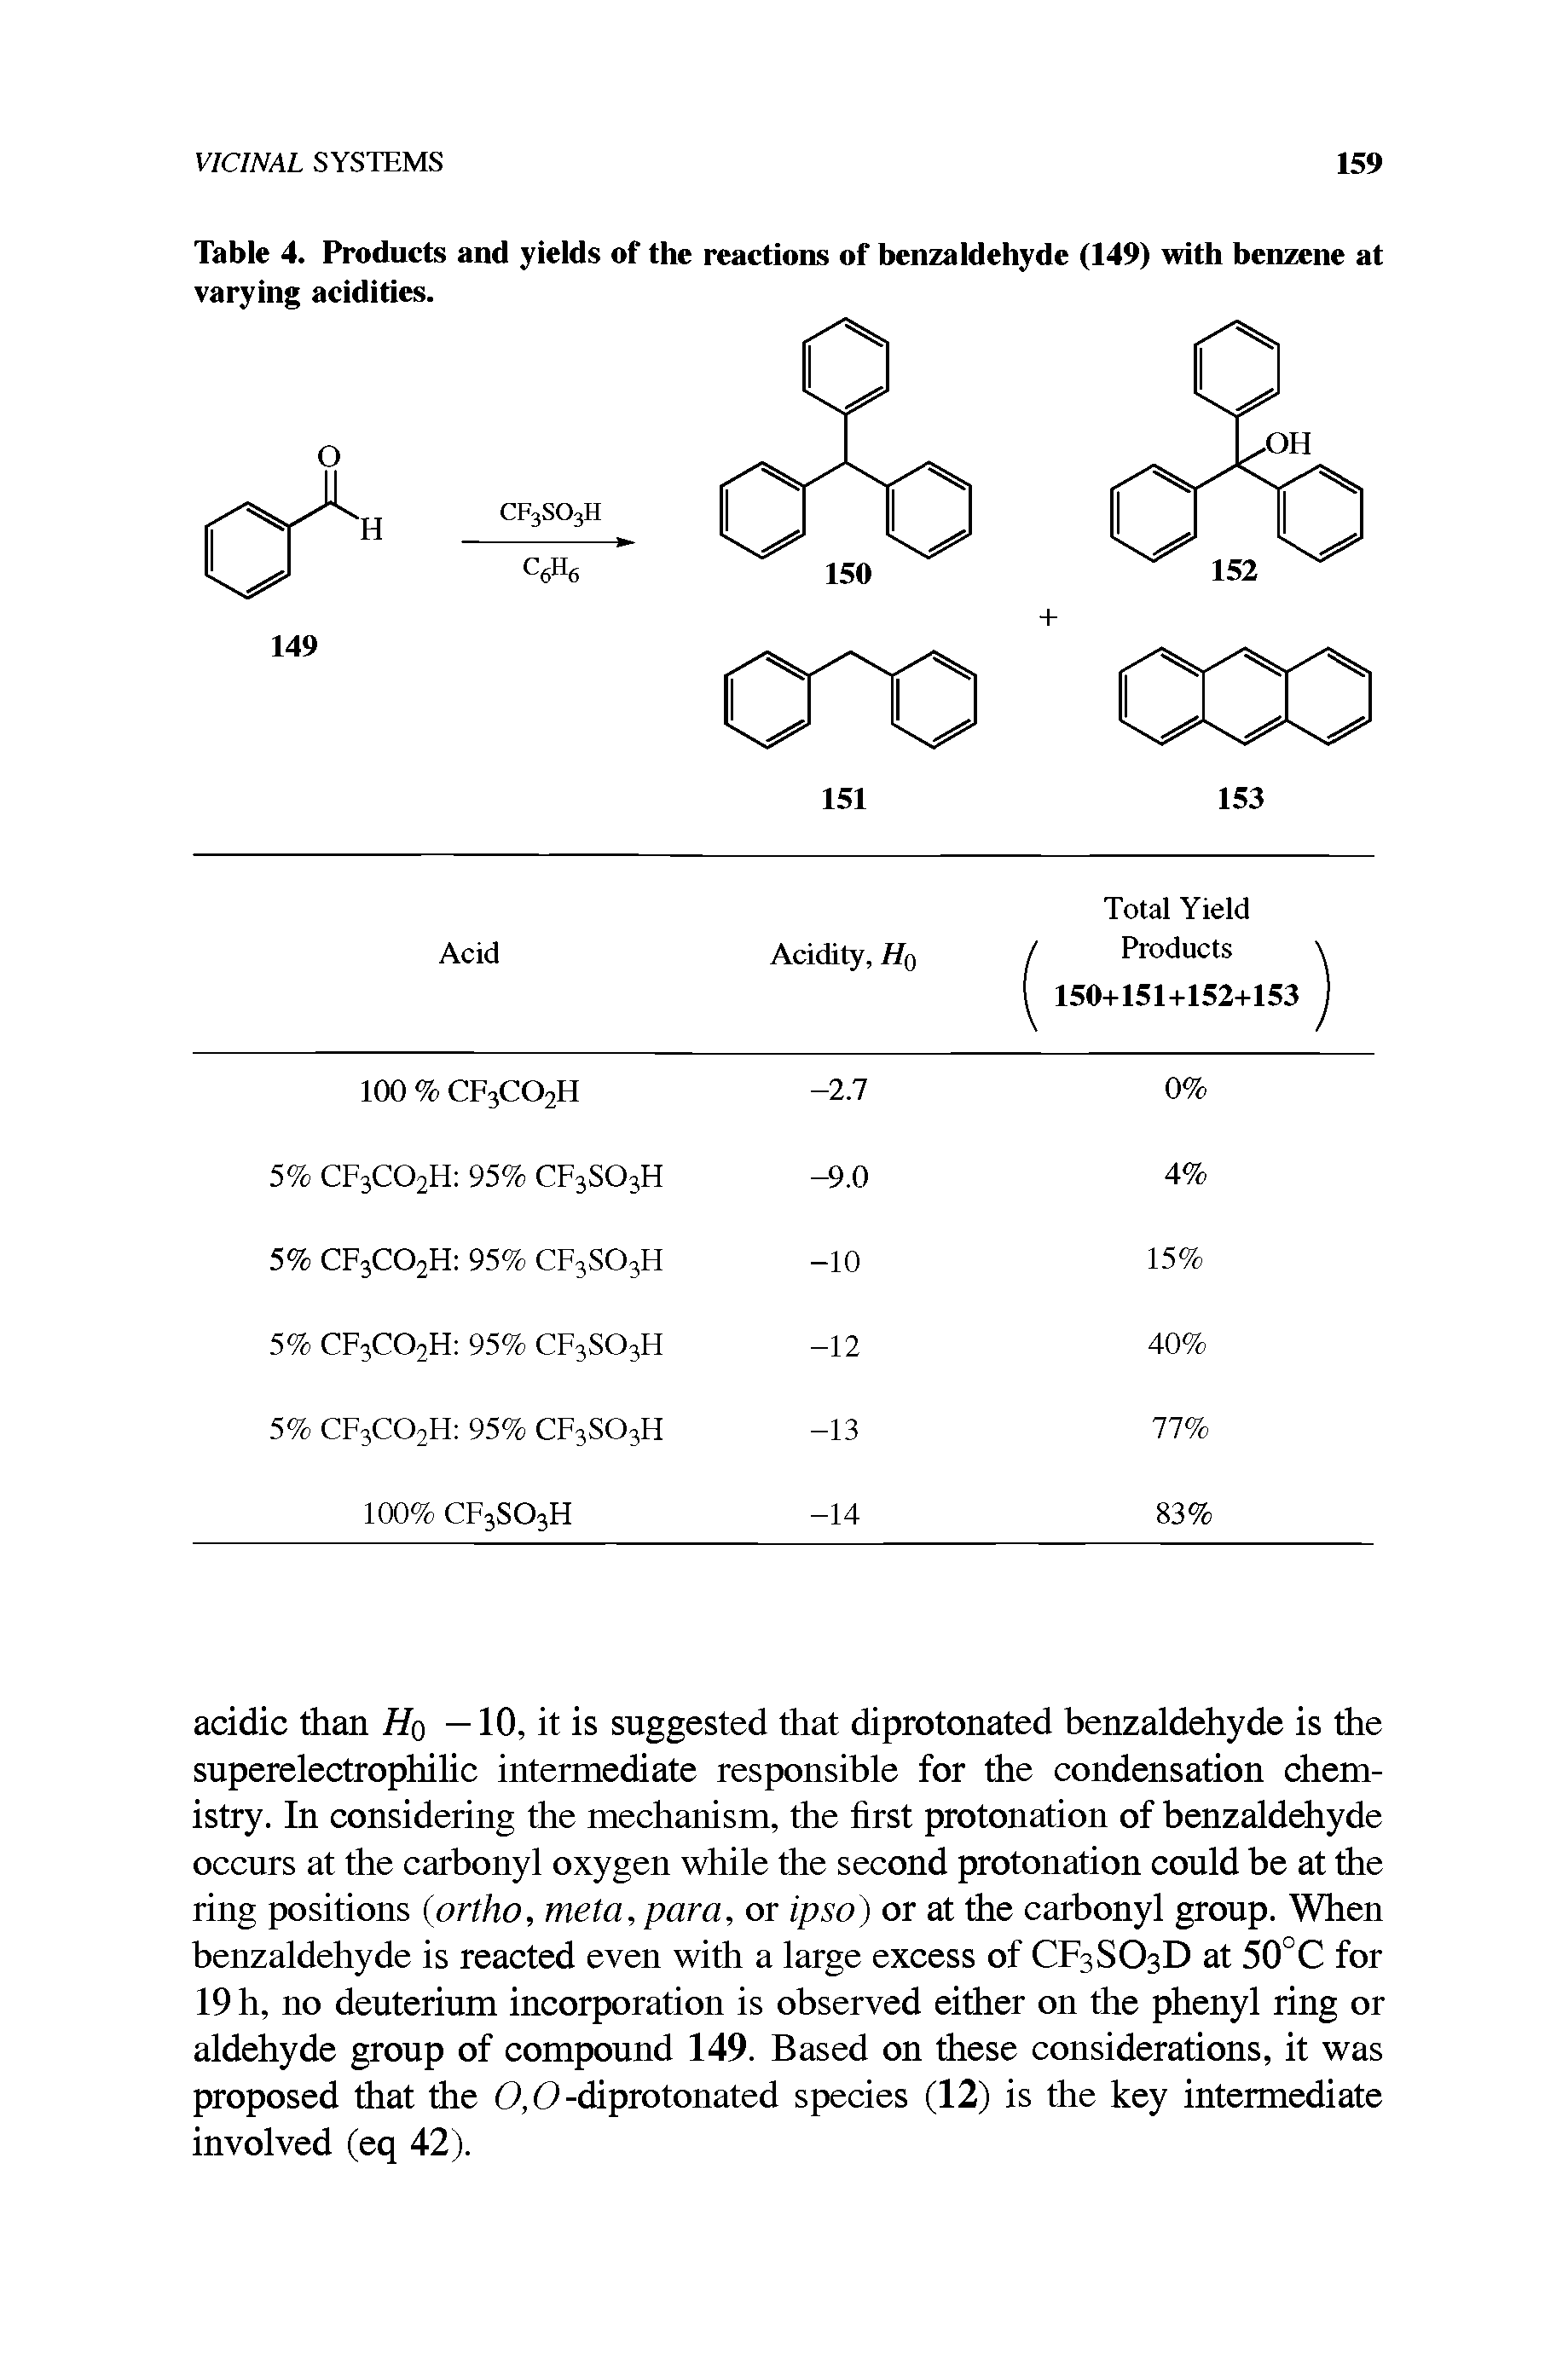 Table 4. Products and yields of the reactions of benzaldehyde (149) with benzene at varying acidities.